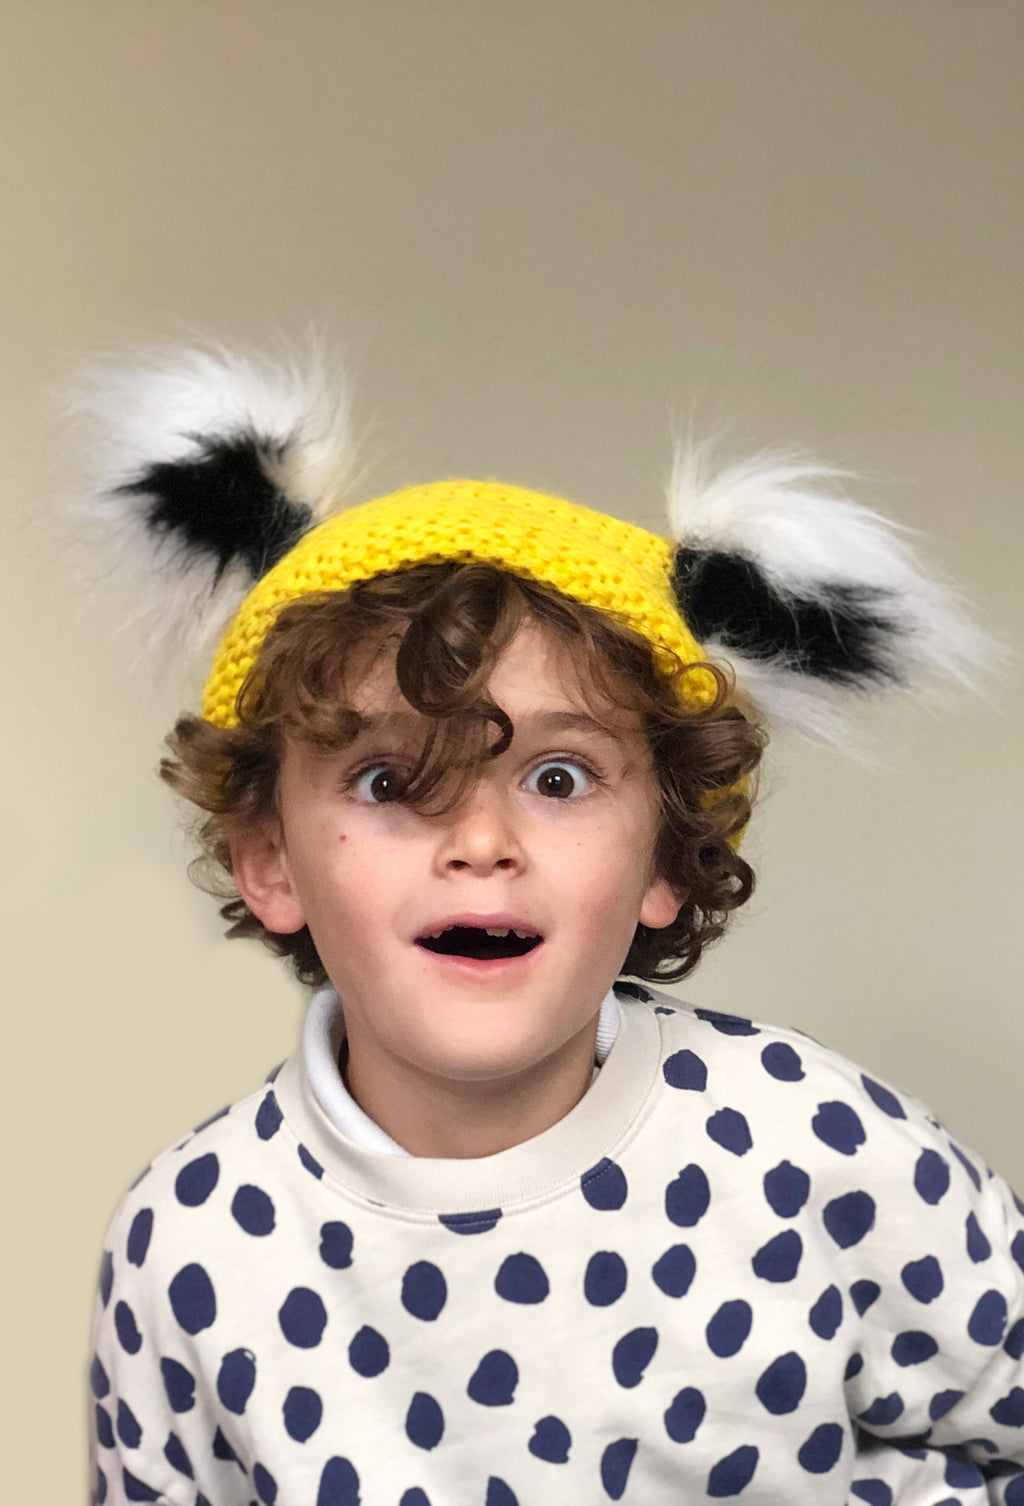 A toothless child aged 5 looks ADHD wearing Bobo Choses jumper and TellTails black & white animal ears attached with magnets to a yellow beanie. Fancy dress novelty ears suitable for lemur, cat, racoon role play, cosplay, world book day characters. Animal themed parties. Faux fur accessory, Character King Julien. Christmas present with matching tail. TellTails gift, stocking filler. Wearable animal ears. Beetlejuice, Dr Seuss for Halloween. As seen on dragons den by Deborah Meaden. 